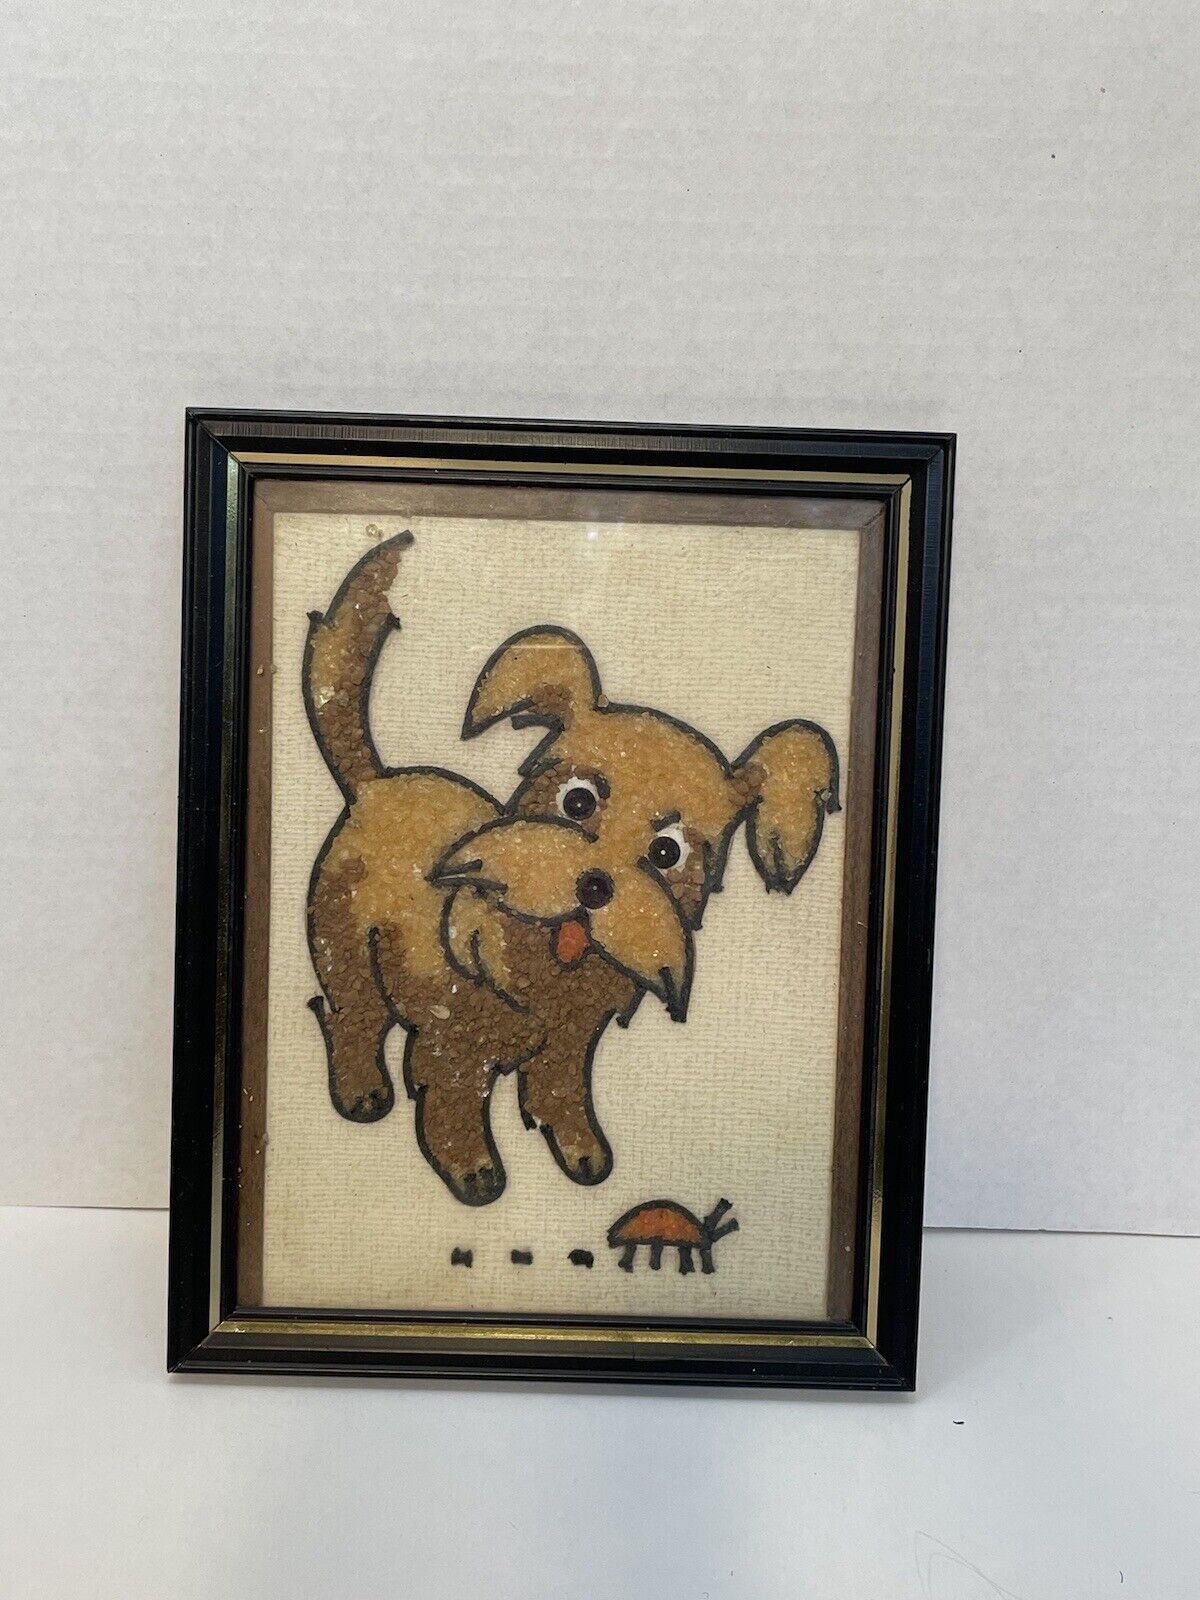 Vtg 60s Gravel Pebble Art Picture Nosey Puppy Craft Master Mosette 7x9.25\